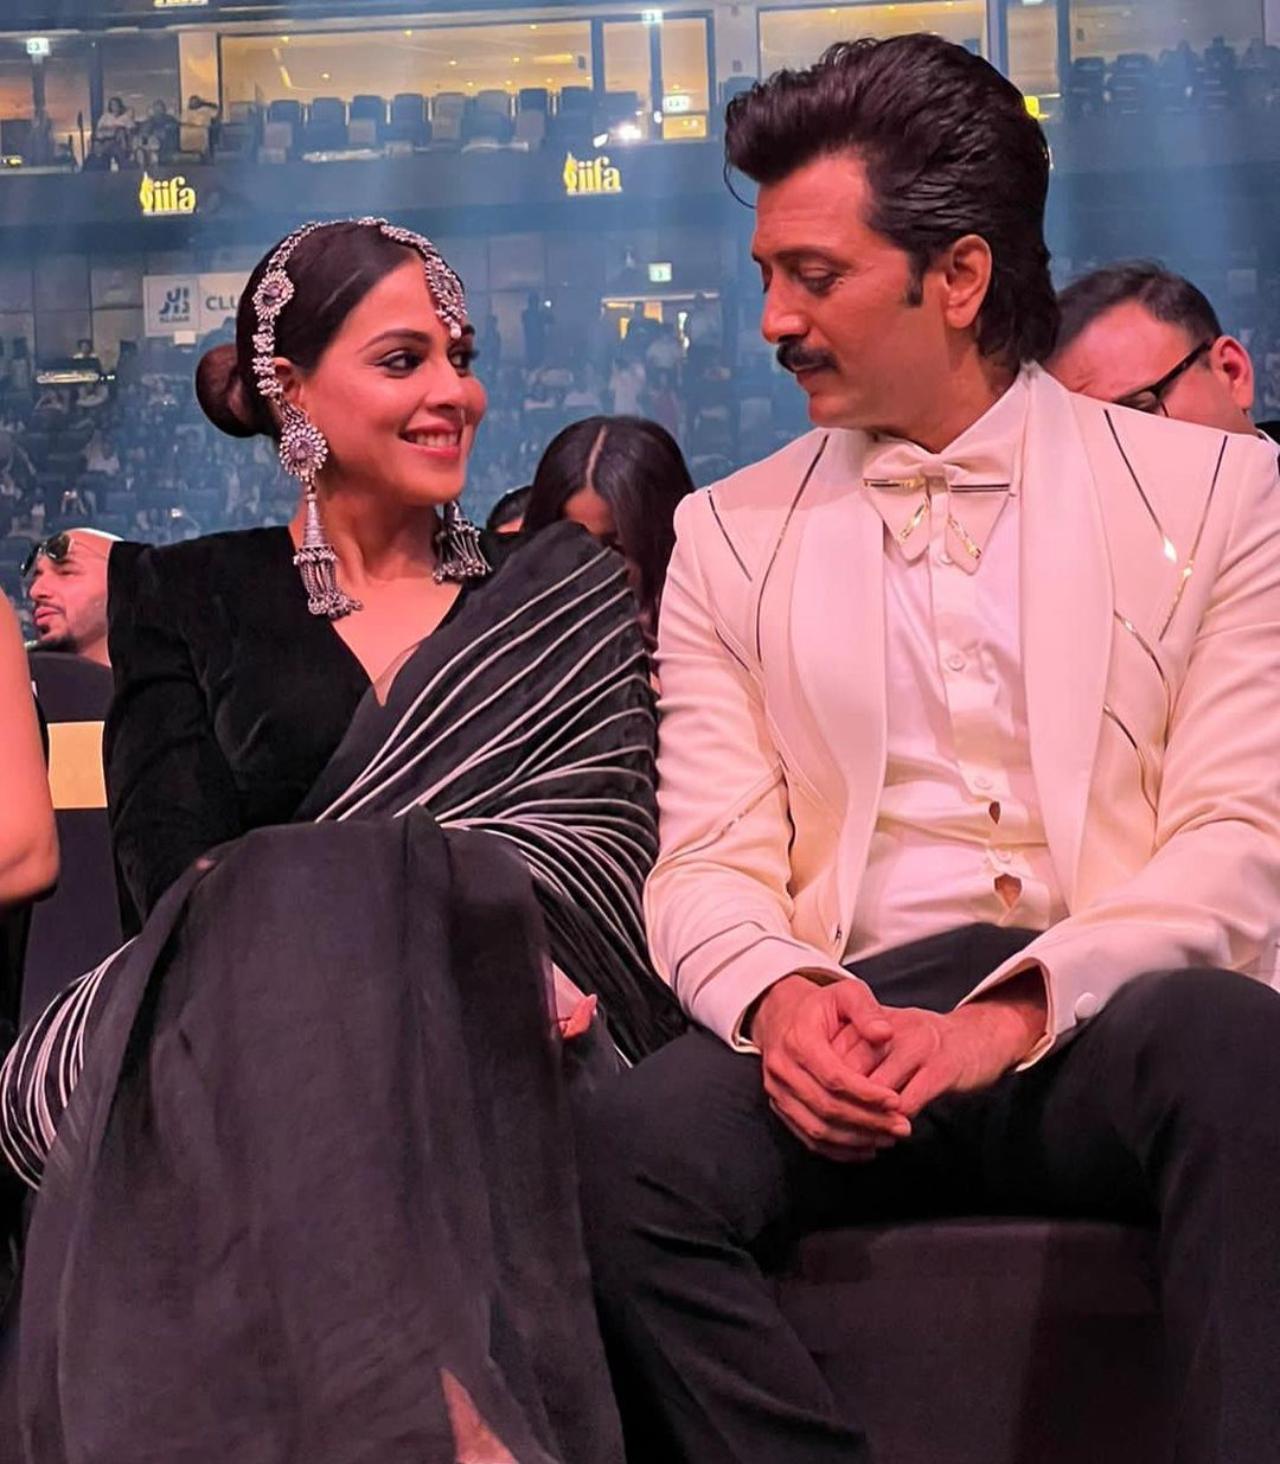 Riteish Deshmukh and Genelia Deshmukh won the award for Outstanding Achievement in Regional Cinema. The couple complimented each other in white and grey outfits. Here, the couple was captured in a candid moment as they enjoyed the show as an audience